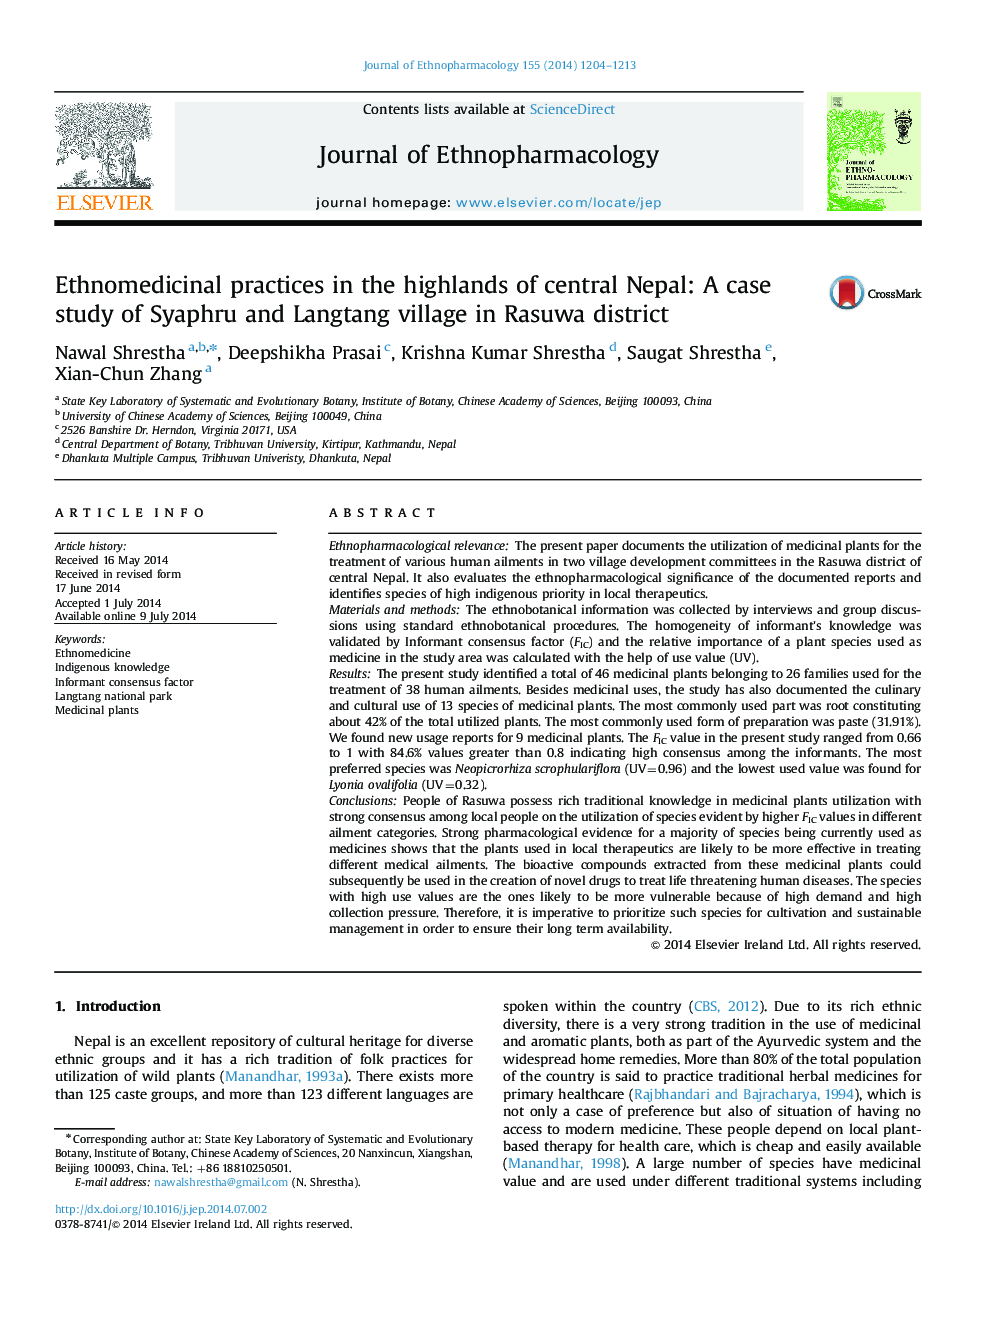 Ethnomedicinal practices in the highlands of central Nepal: A case study of Syaphru and Langtang village in Rasuwa district